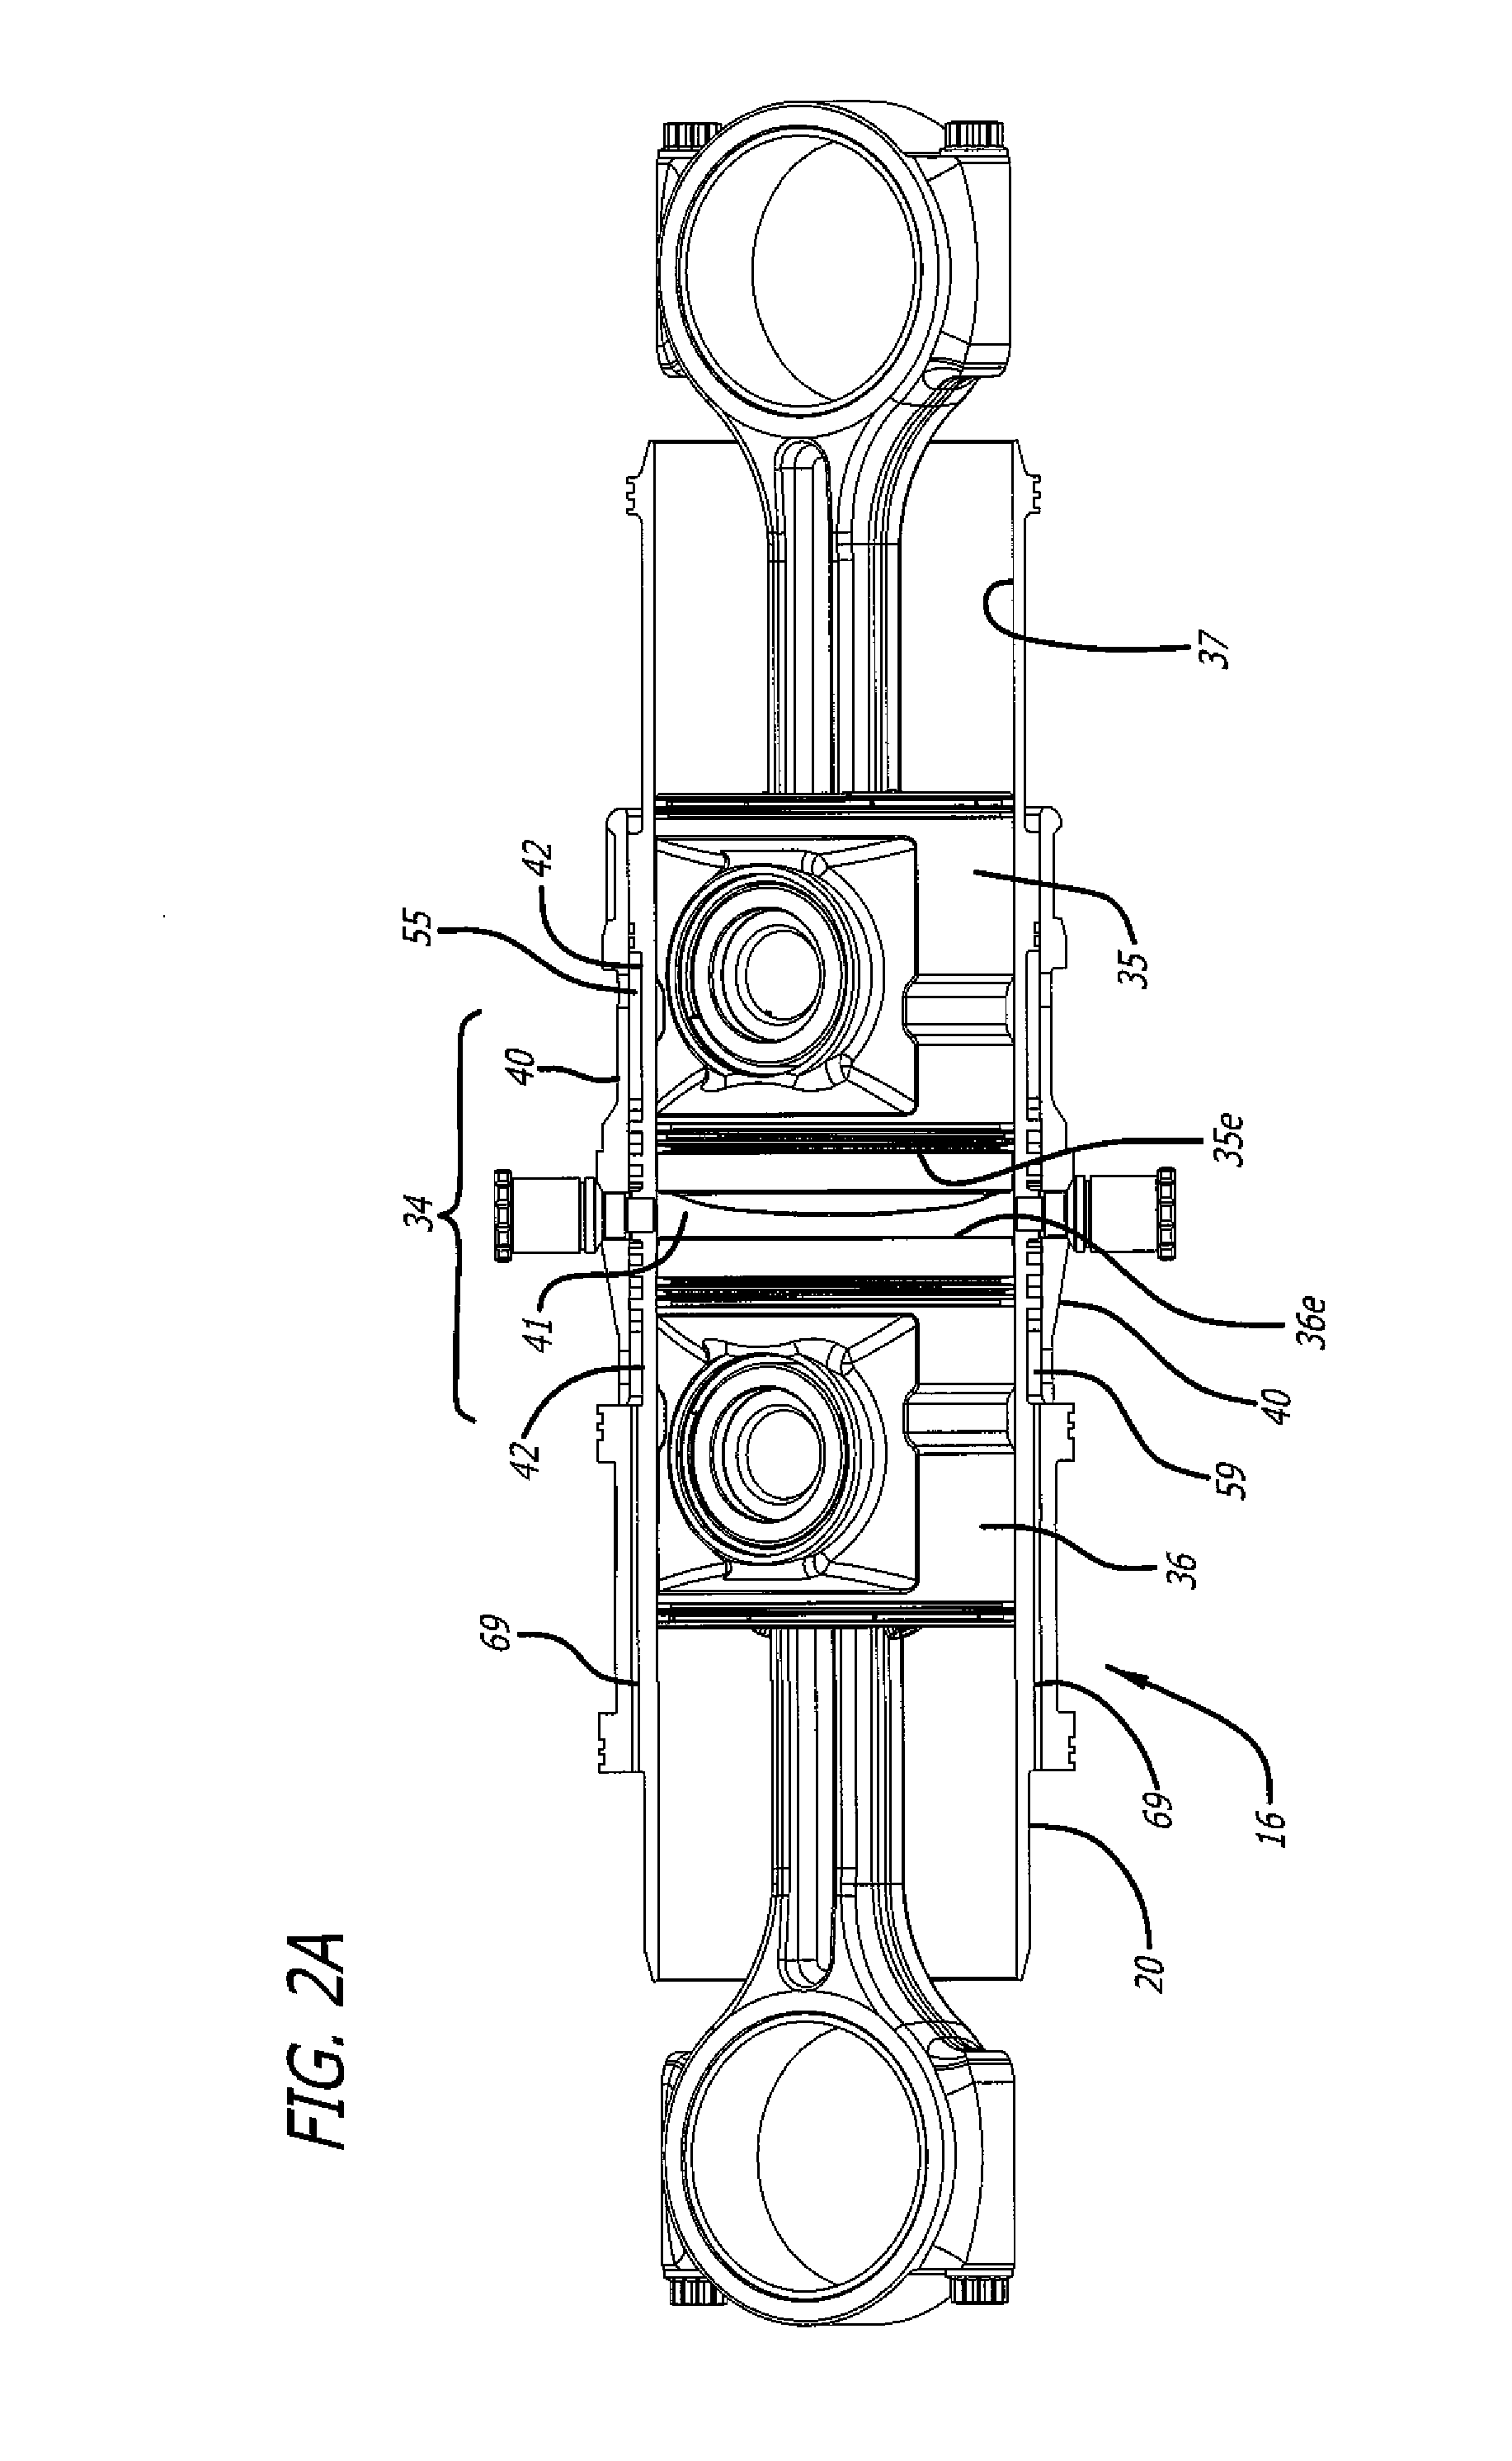 Cylinder For Opposed-Piston Engines